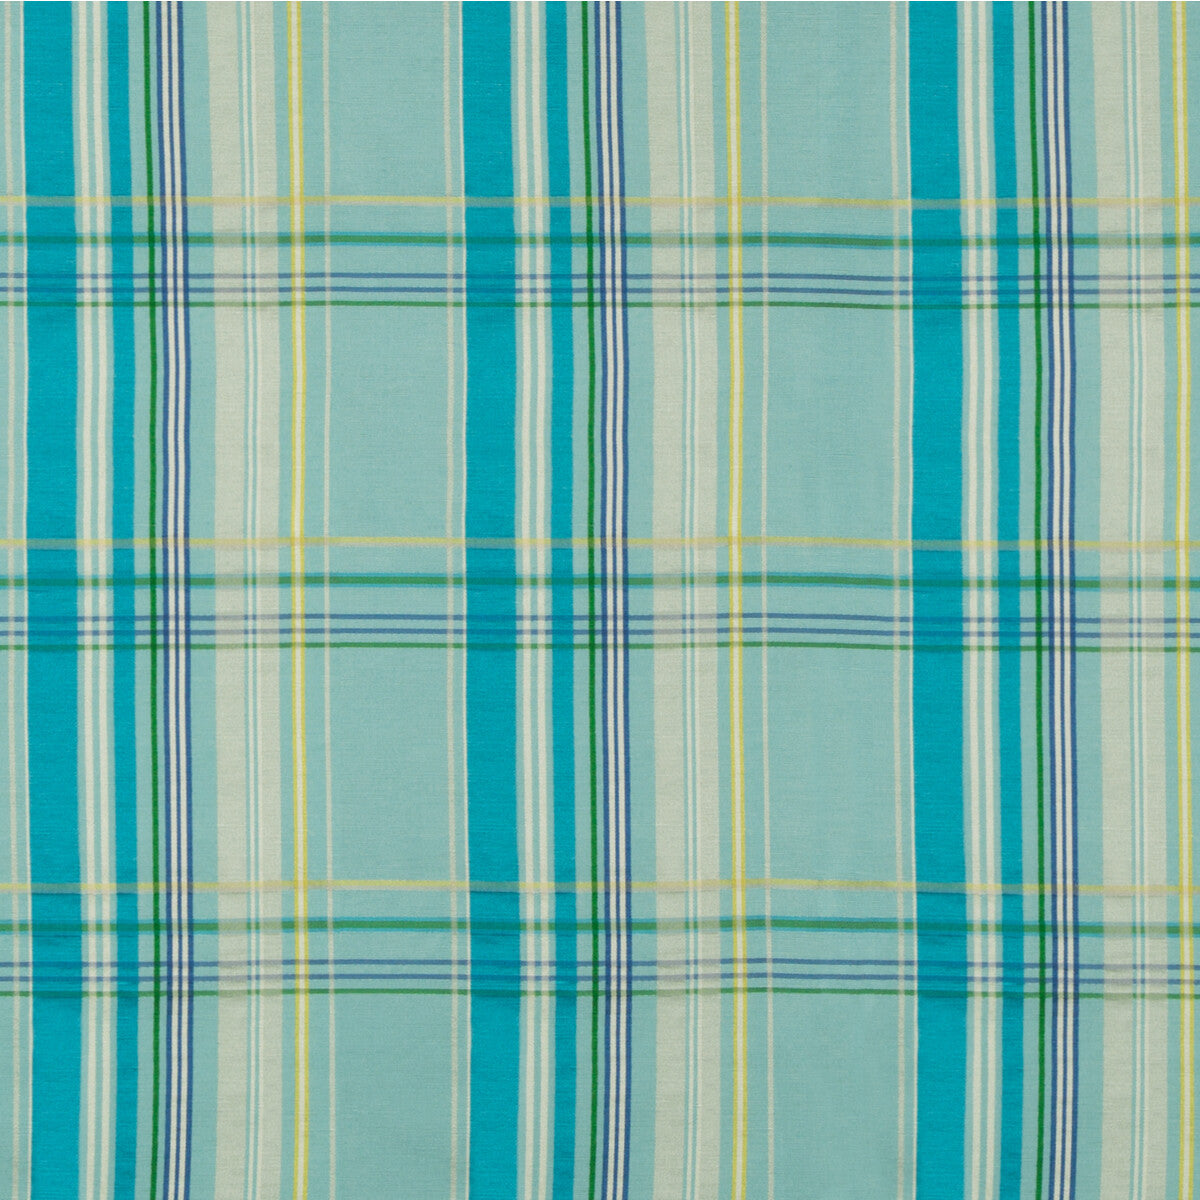 La Comelle Plaid fabric in aqua color - pattern 8018108.13.0 - by Brunschwig &amp; Fils in the Baret collection